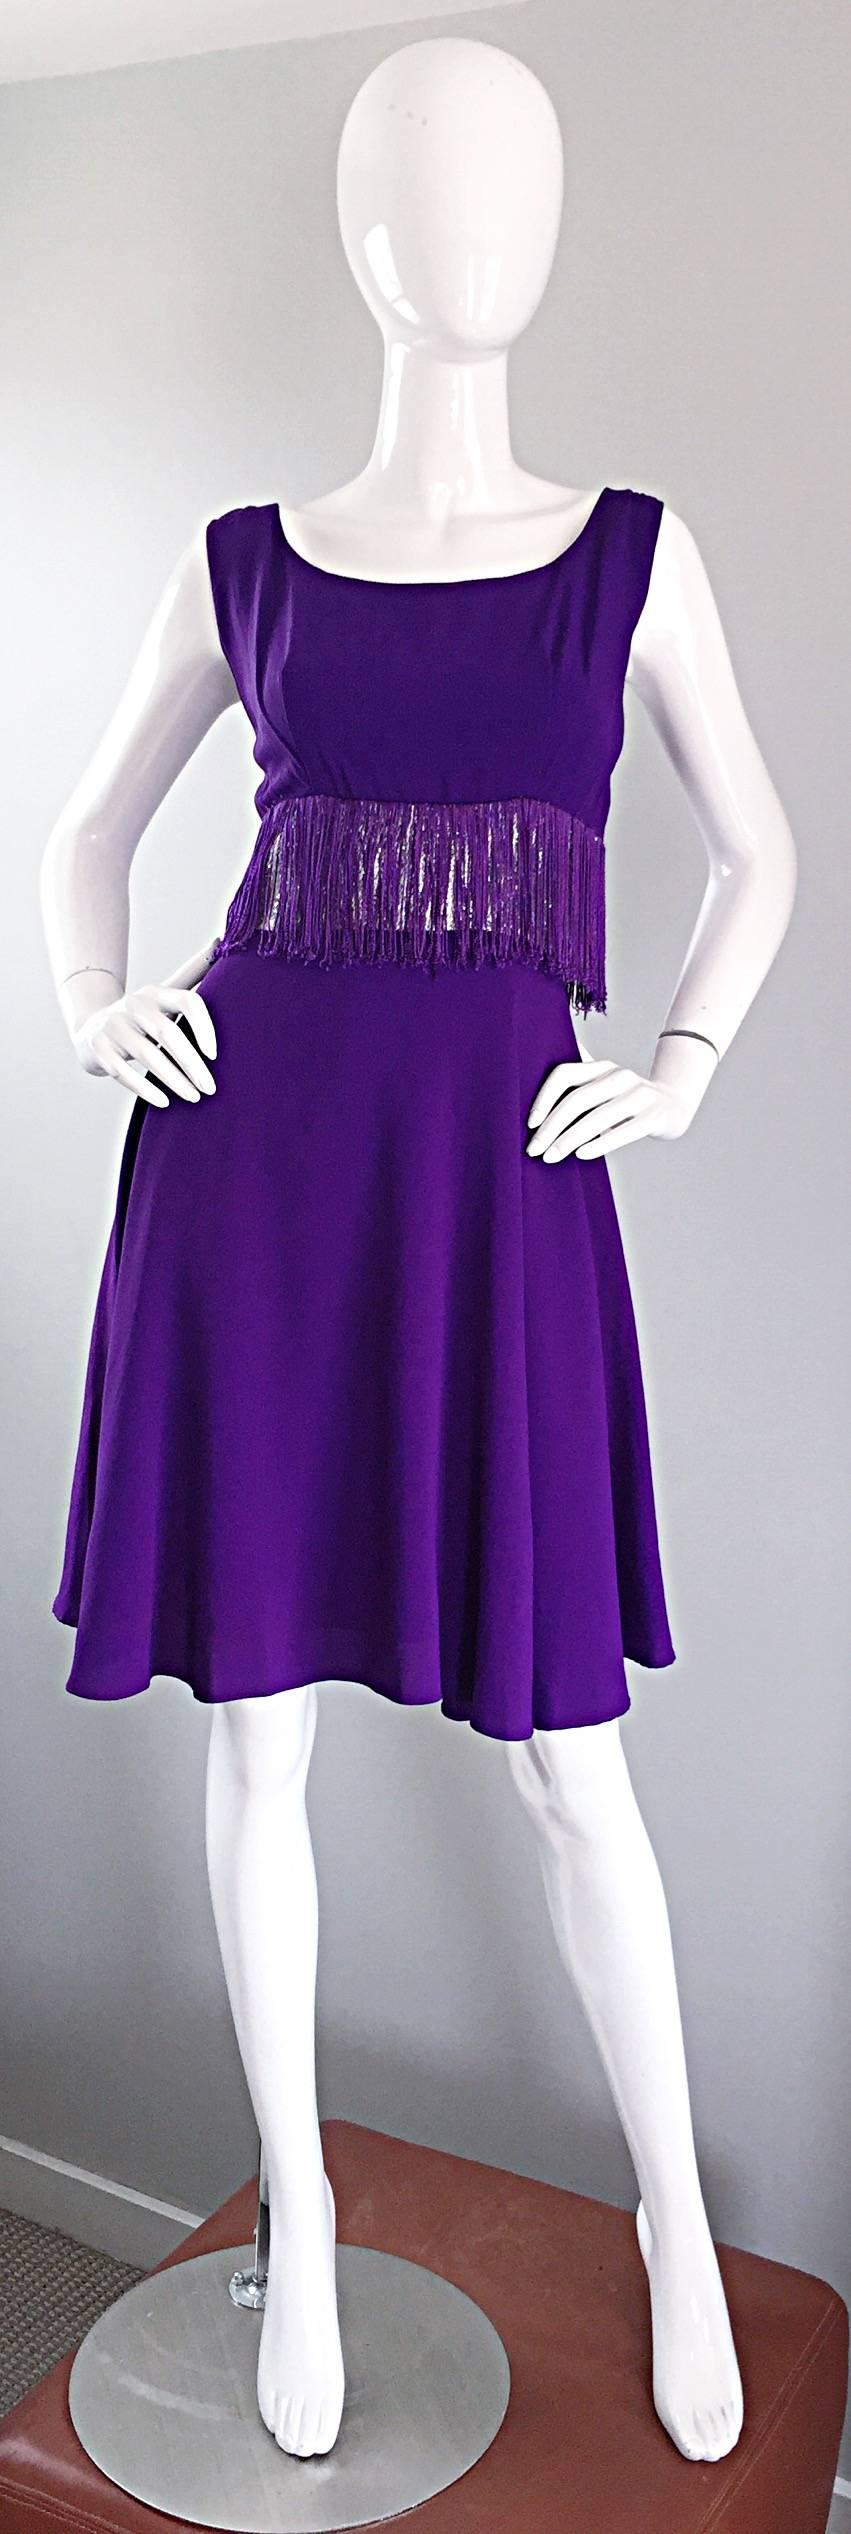 Cutest vintage 1960s purple and silver metallic fringed A - Line dress! Flattering pleats at each bust, with a tailored bodice and full A-Line skirt. Features a silver metallic lurex waistband with purple fringe hand-sewn on top (on the front and